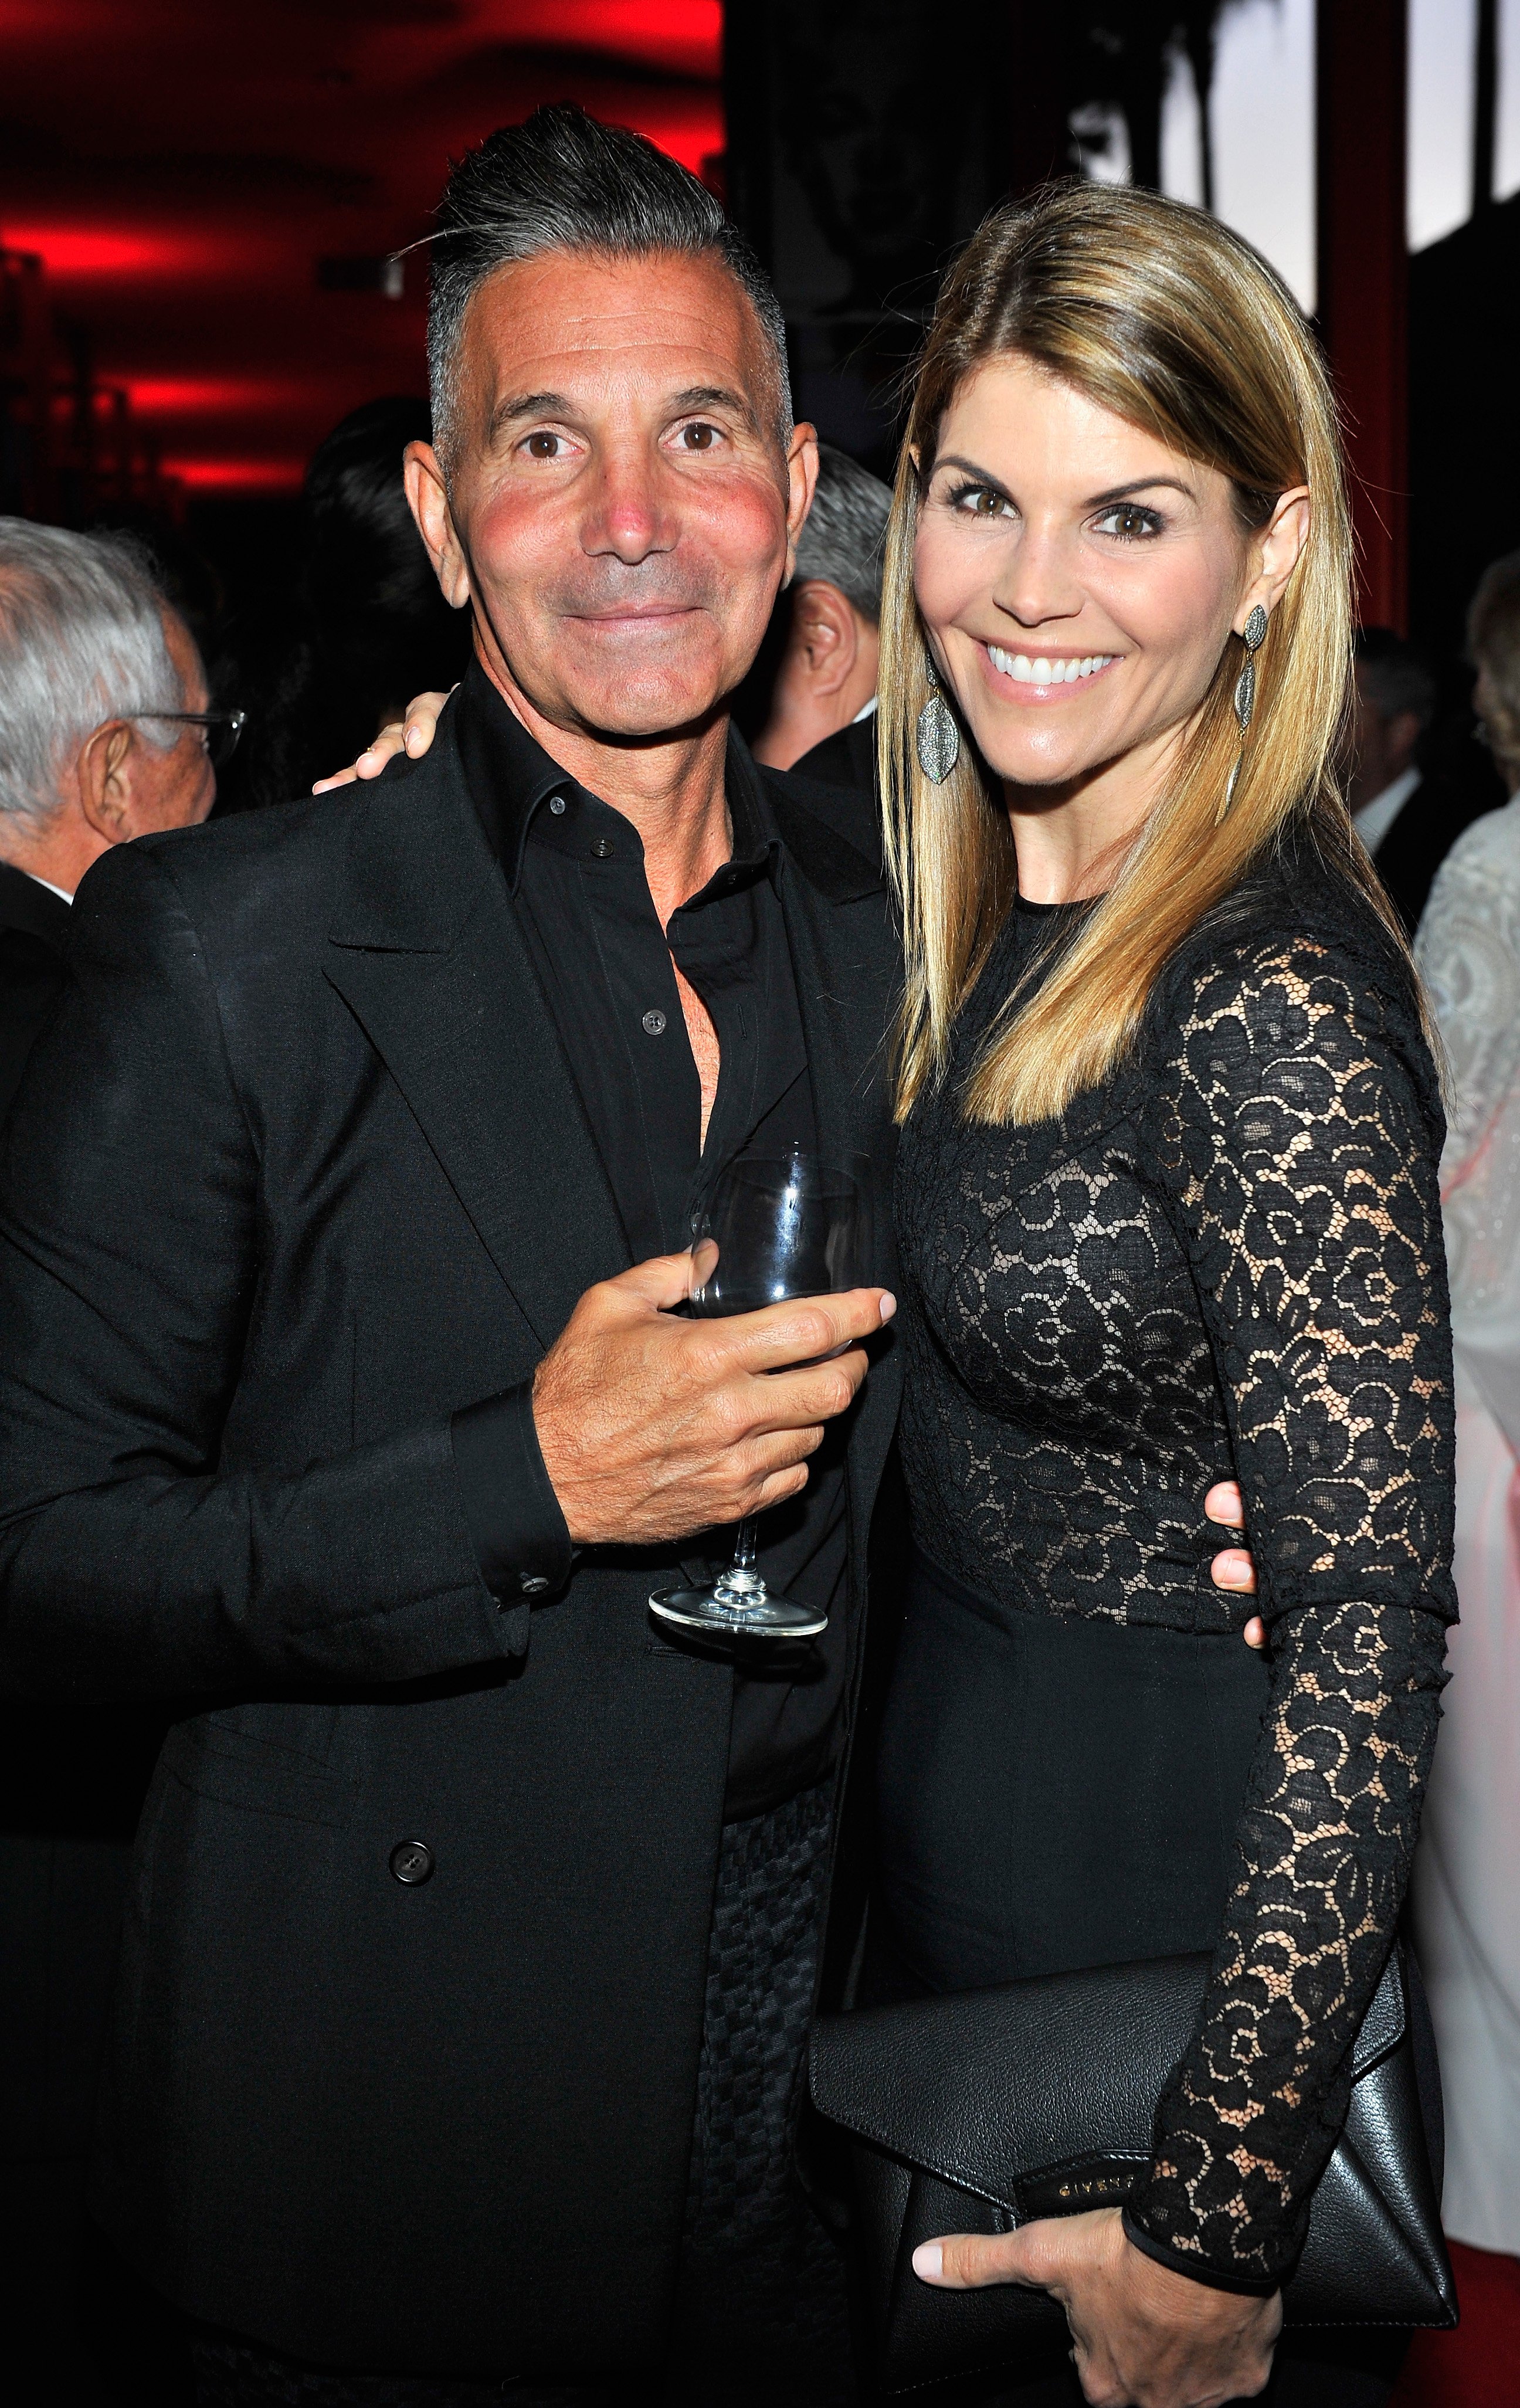 Mossimo Giannulli and Lori Loughlin attend LACMA's 50th Anniversary Gala on April 18, 2015, in Los Angeles, California.  Source: Getty Images.